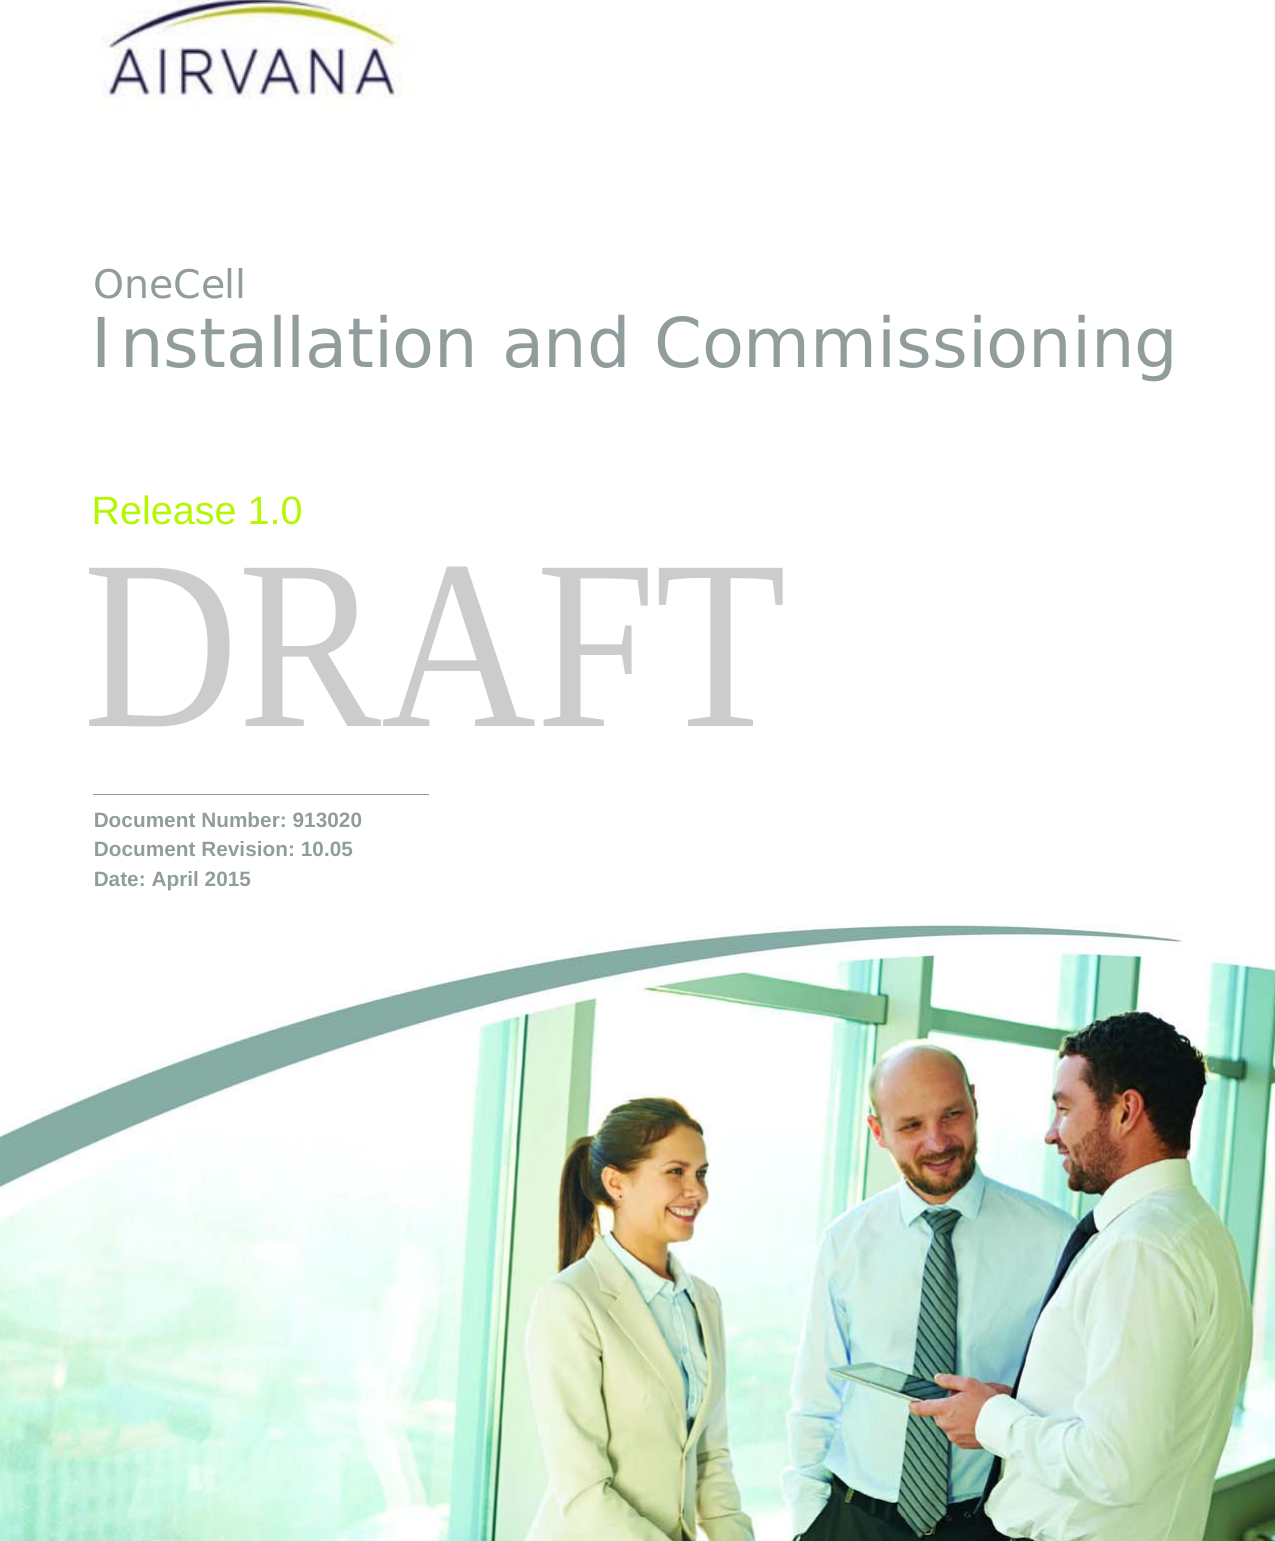 DRAFTInstallation and CommissioningRelease 1.0Document Number: 913020 Document Revision: 10.05Date: April 2015OneCell